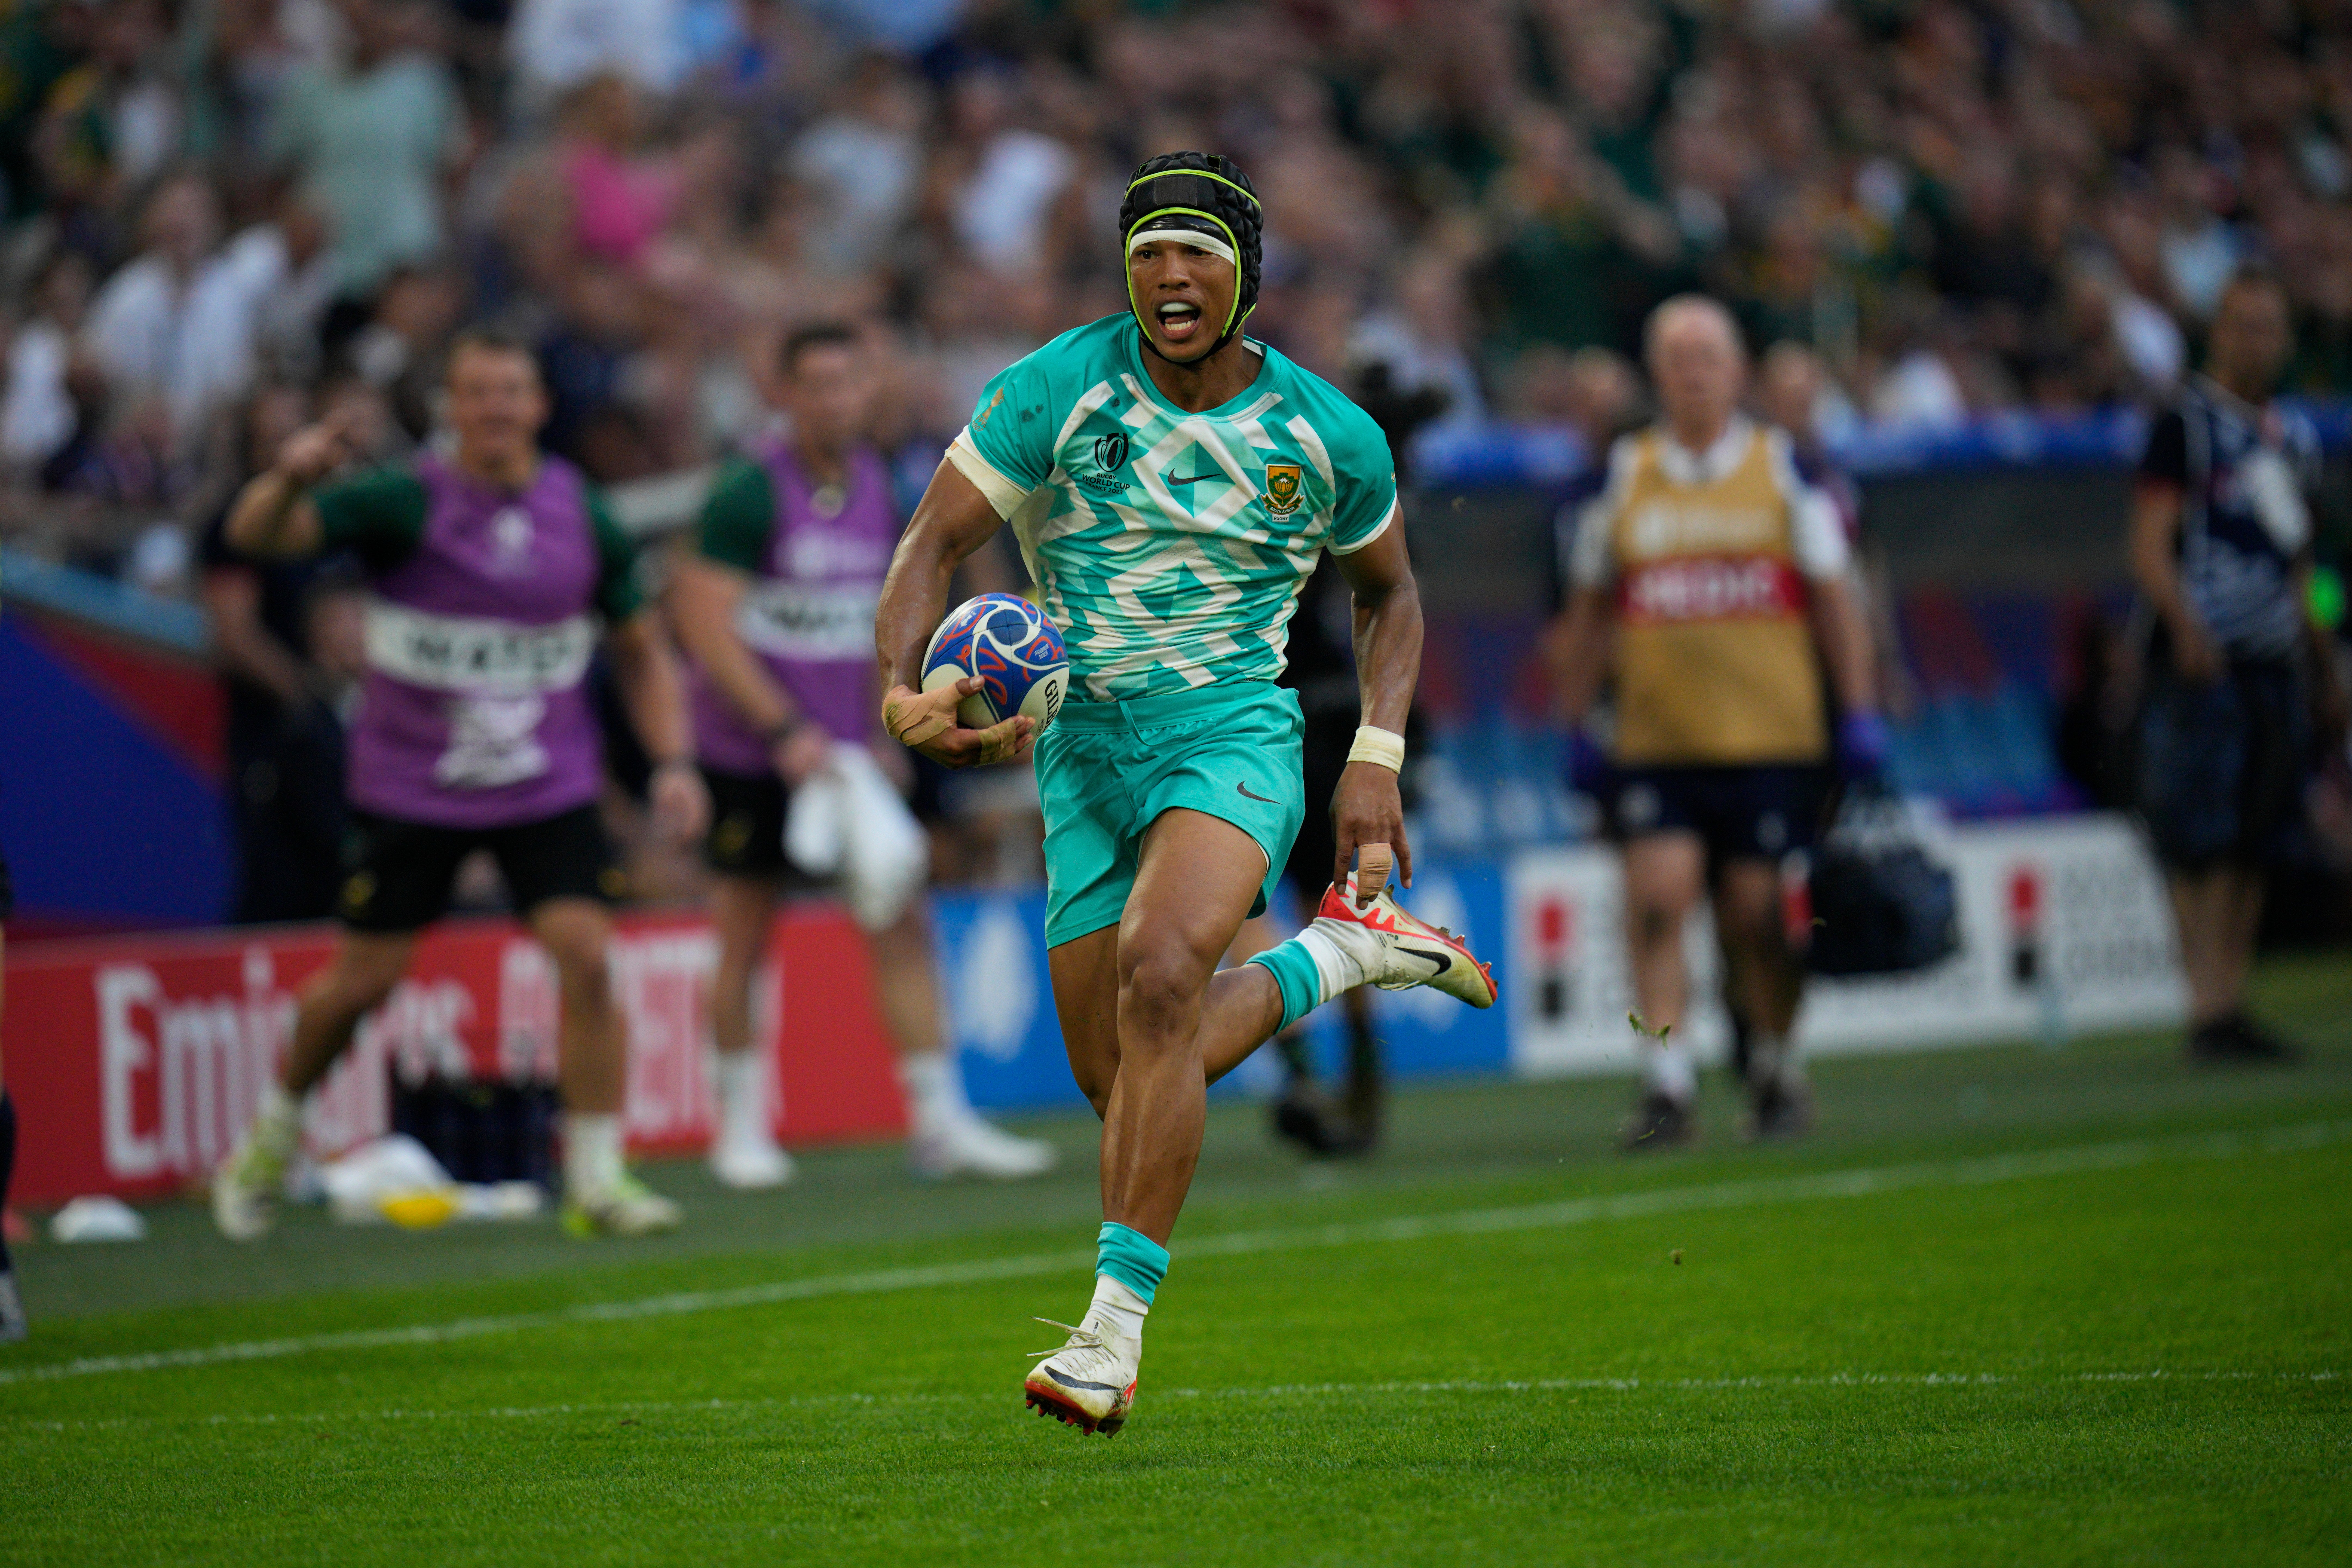 South Africa's Kurt-Lee Arendse runs to scores a try